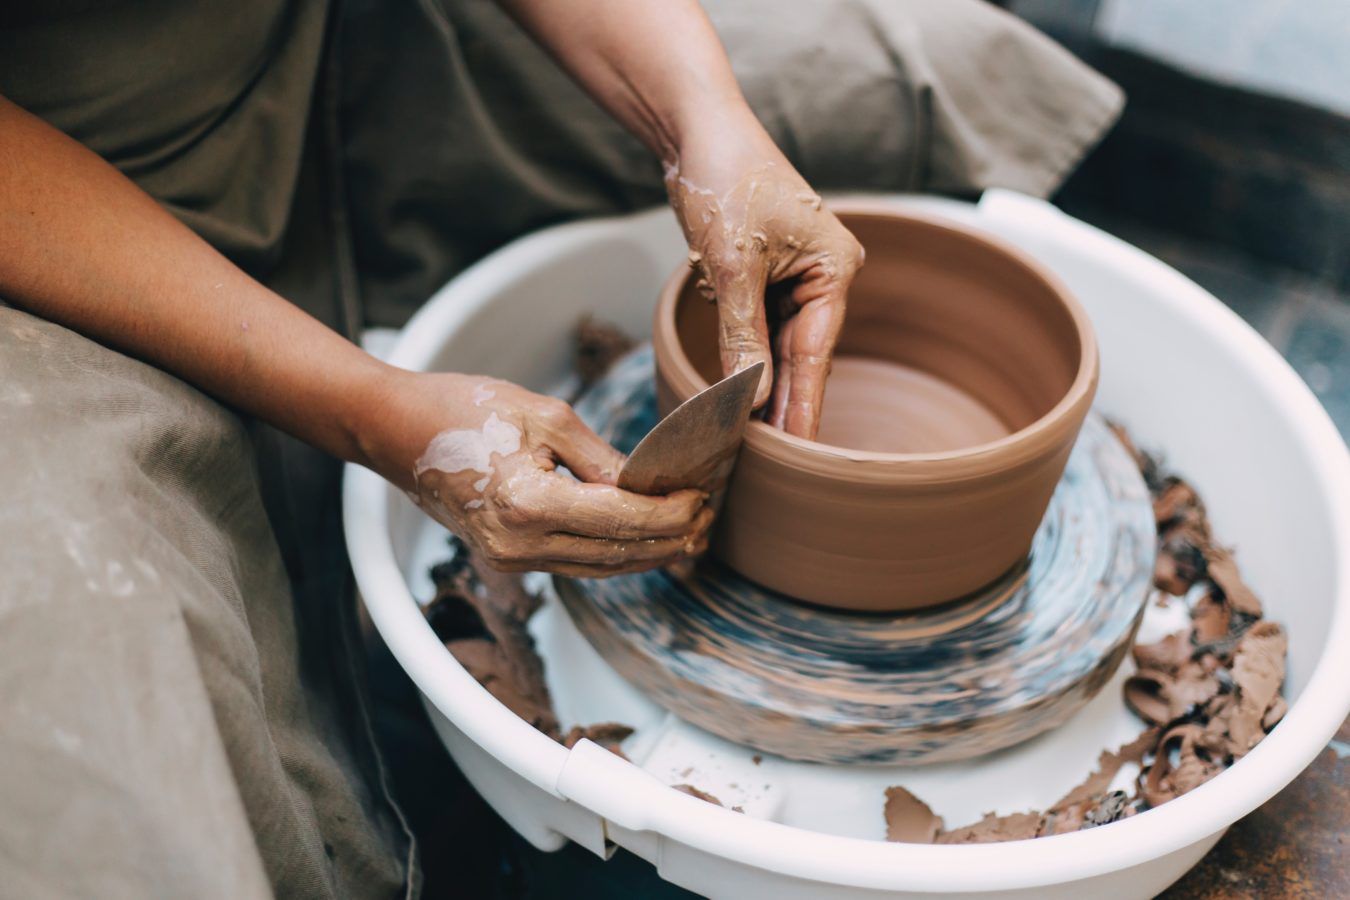 Kiln me softly: Pottery classes in the city